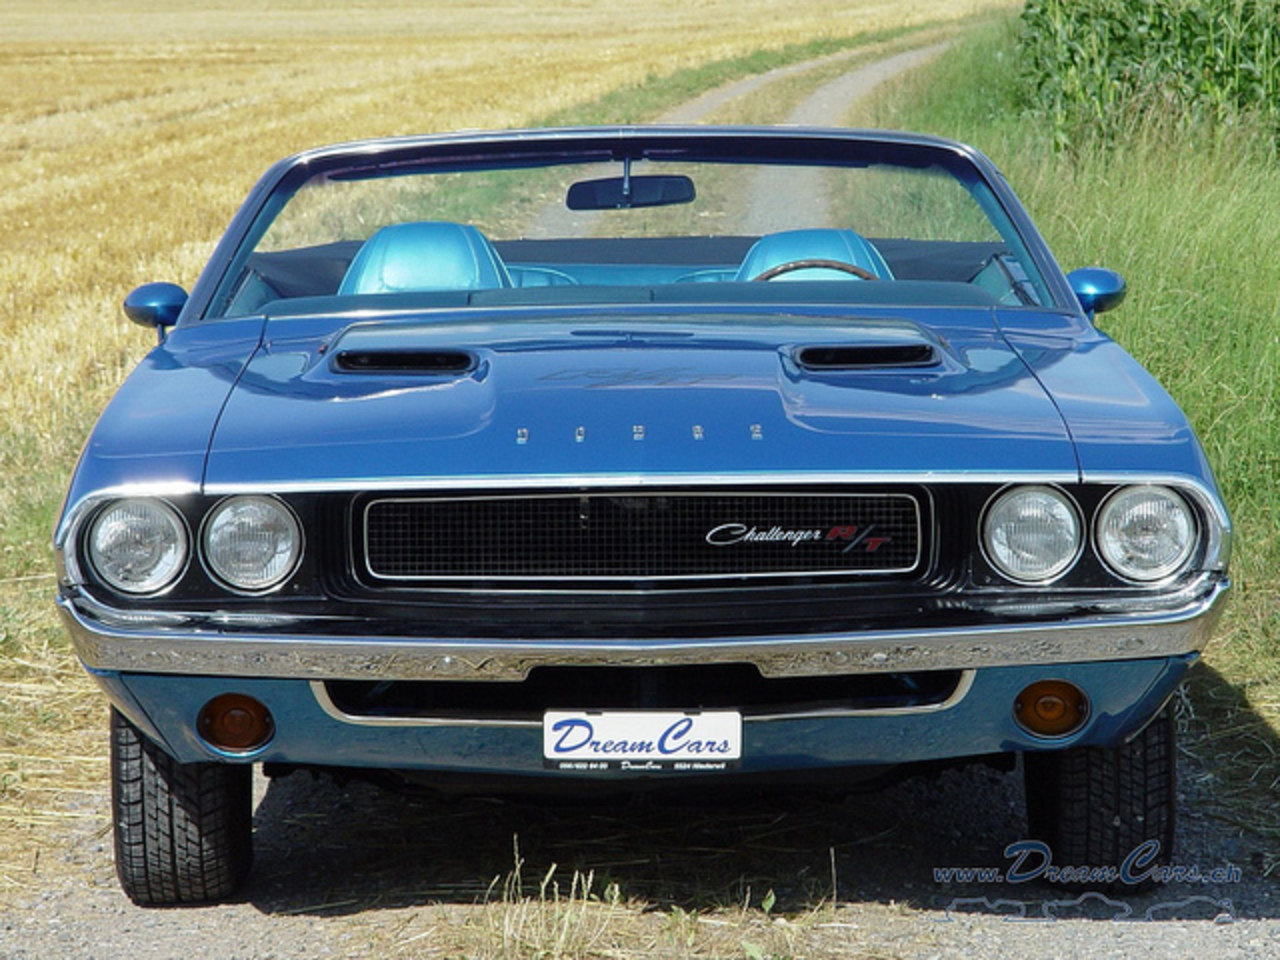 Dodge-Challenger-RT-Convertible-1970-05 | Flickr - Photo Sharing!